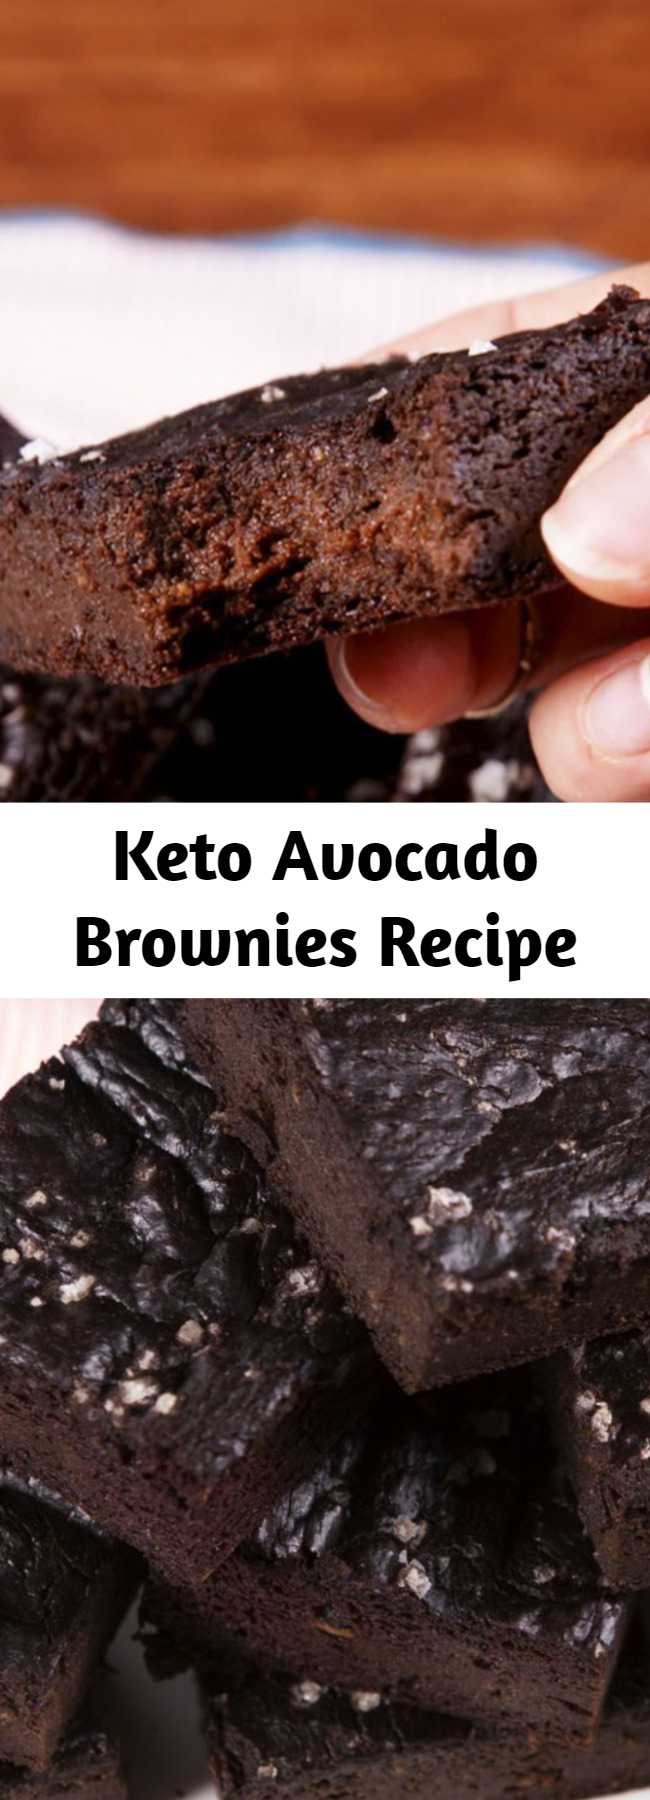 Keto Avocado Brownies Recipe - Who says you can't eat brownies when you're on the keto diet?! These keto brownies are the best. When the chocolate craving is strong. #food #easyrecipe #desserts #keto #healthyeating